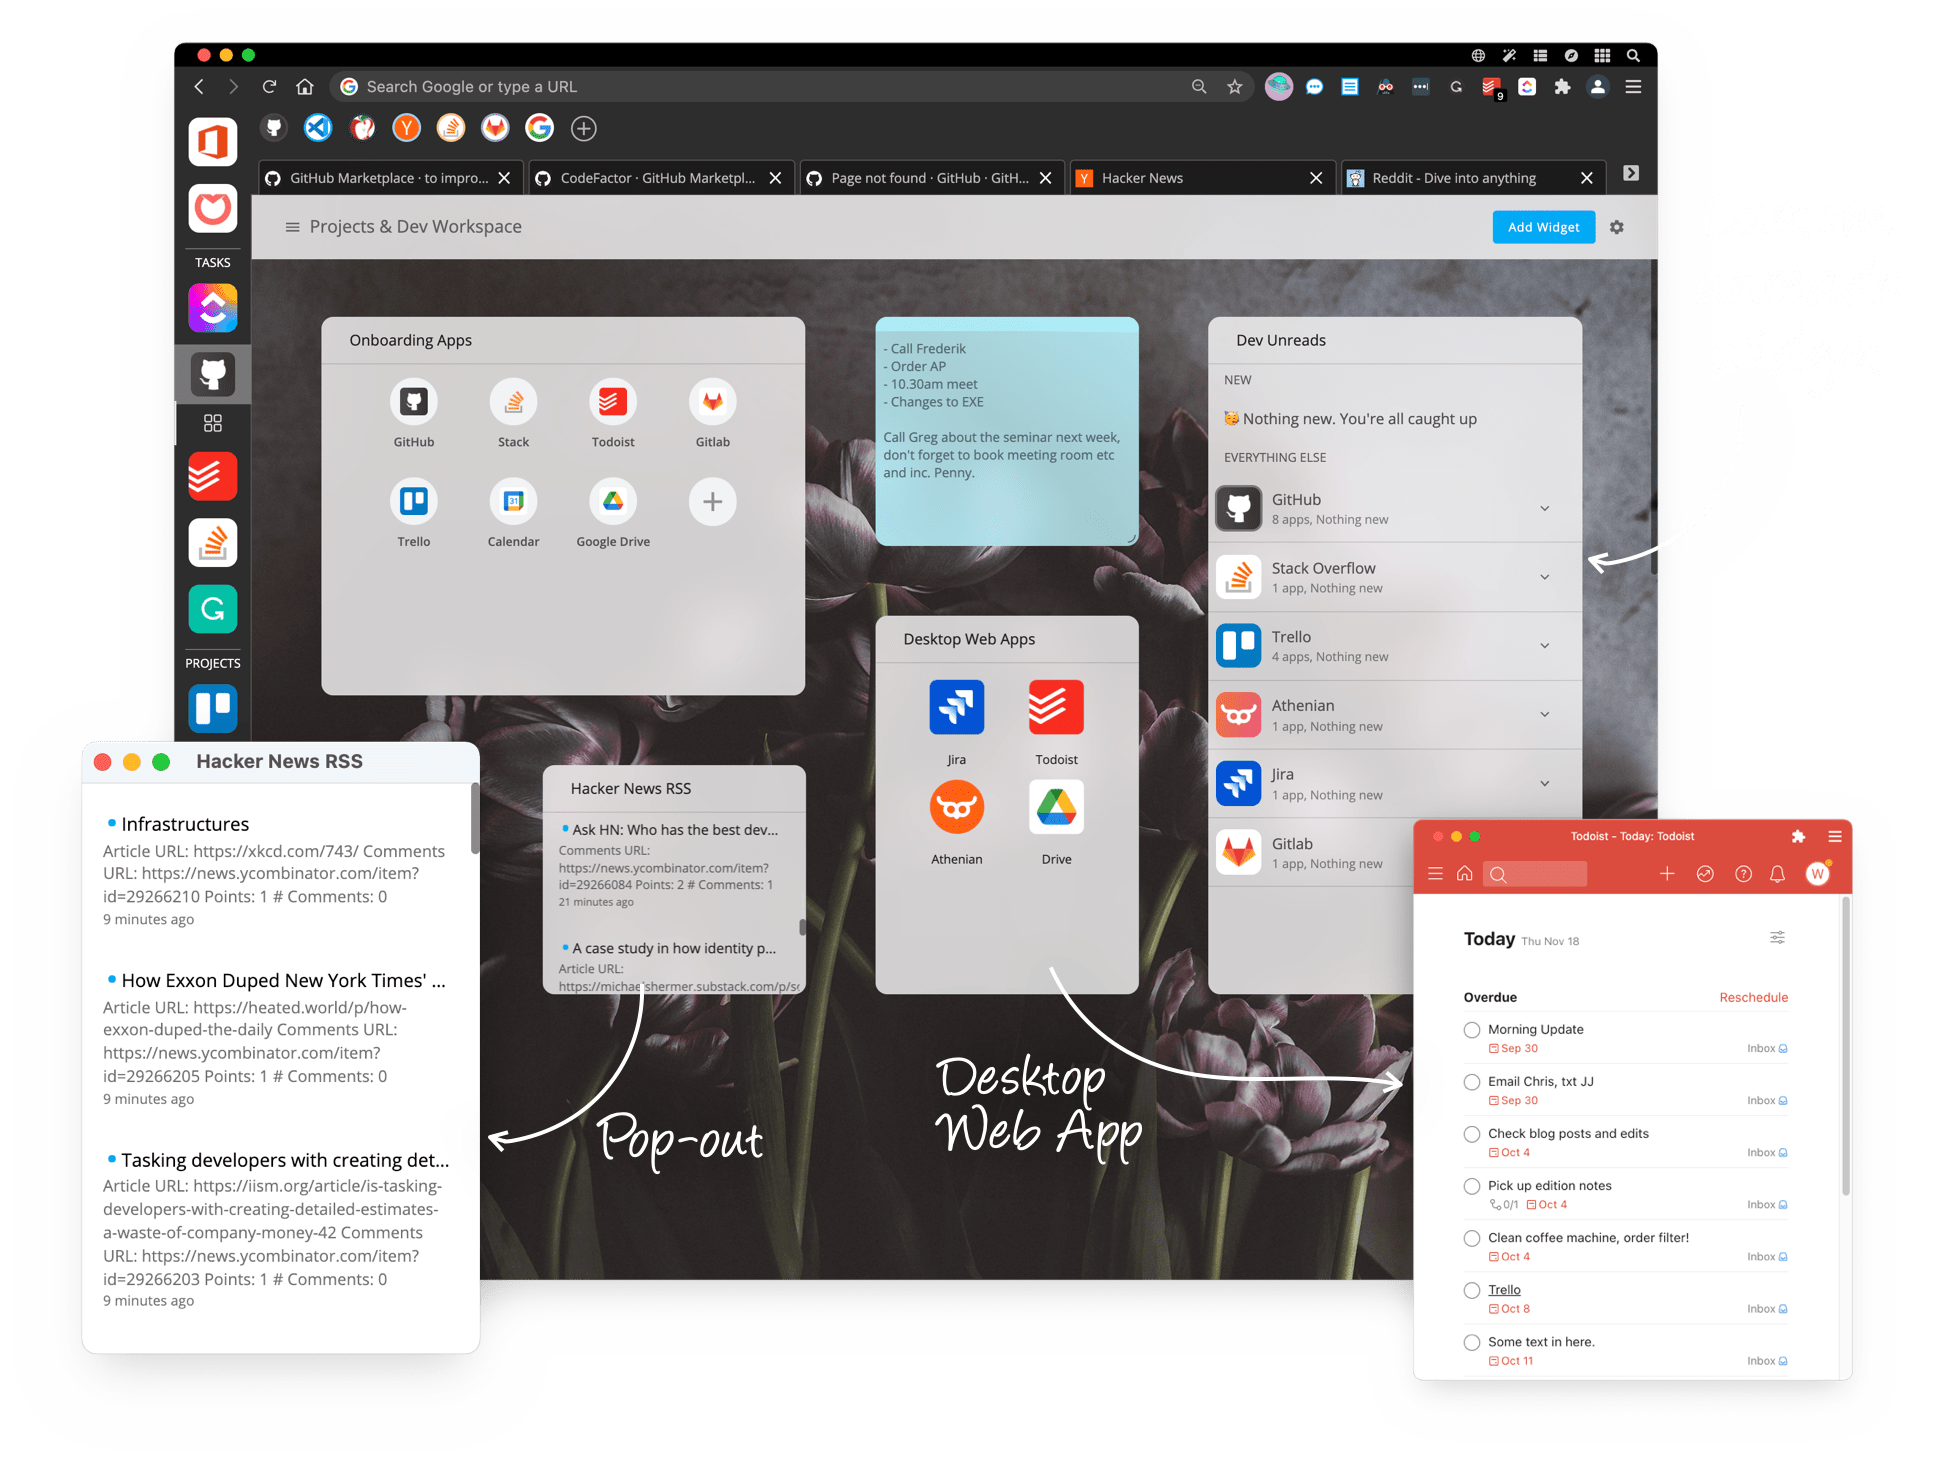 Build the ultimate workspace using widgets